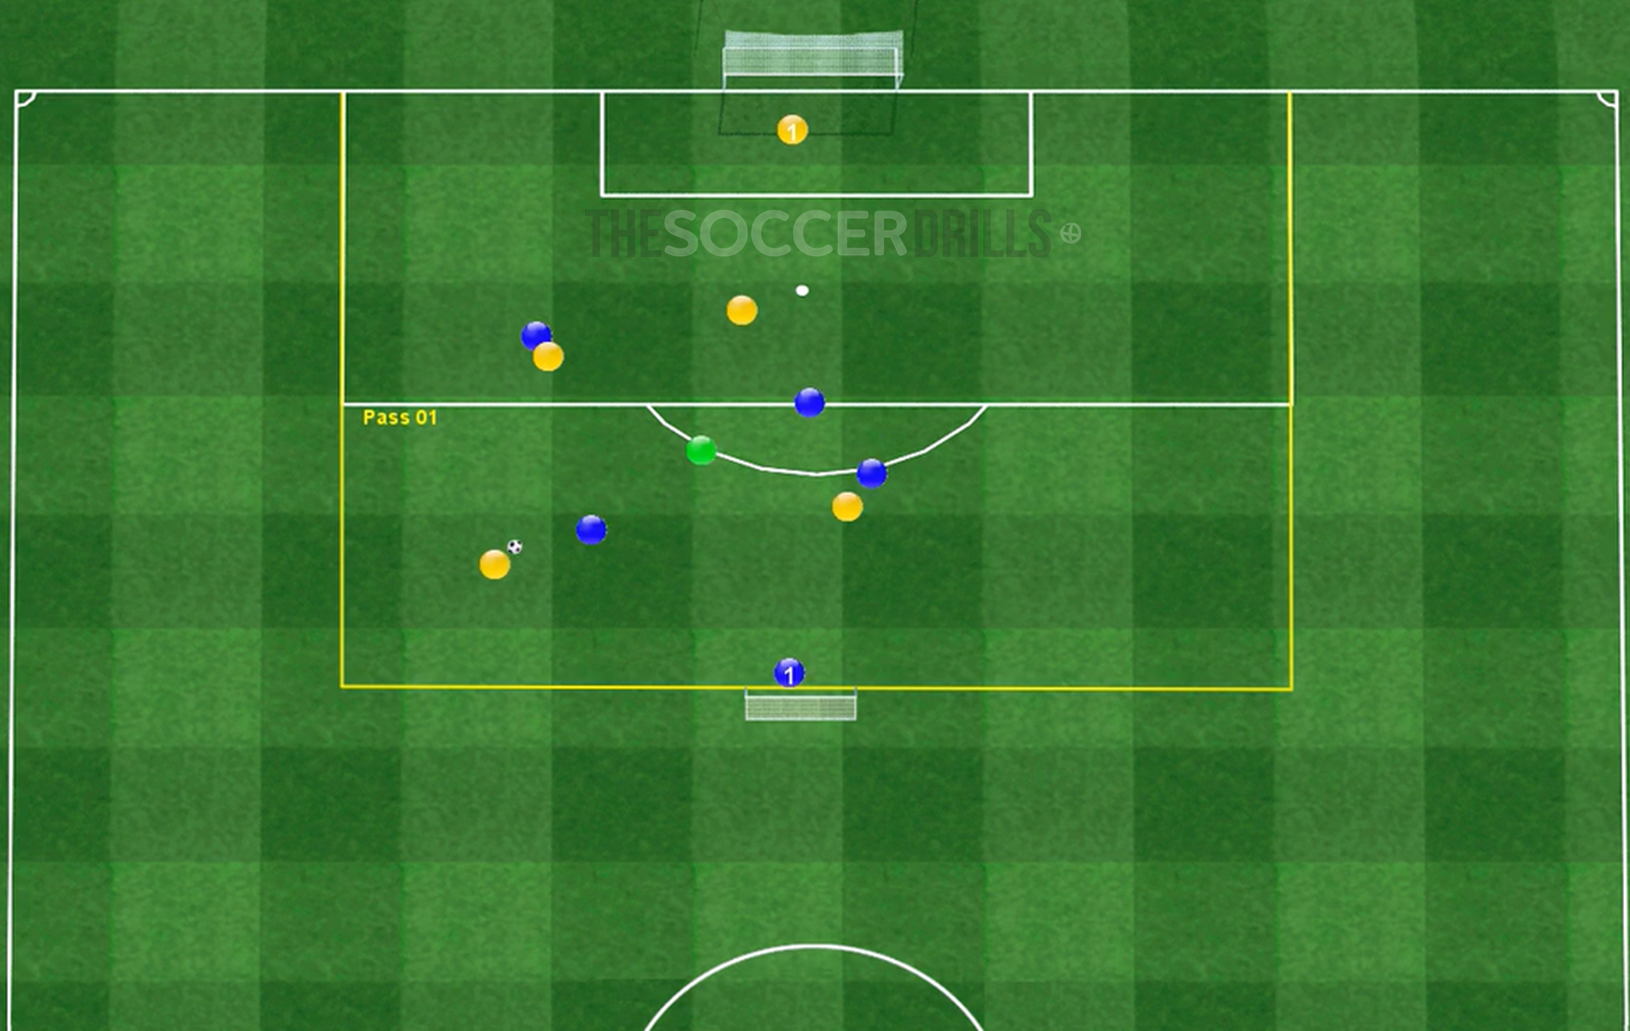 Soccer Drills for coaches, Soccer Drills for kds, Tactical Football Exercises, Tacical Soccer Drills, Drills for counterattack, Possesion possesion drills soccer, Small-Sided Soccer Games,